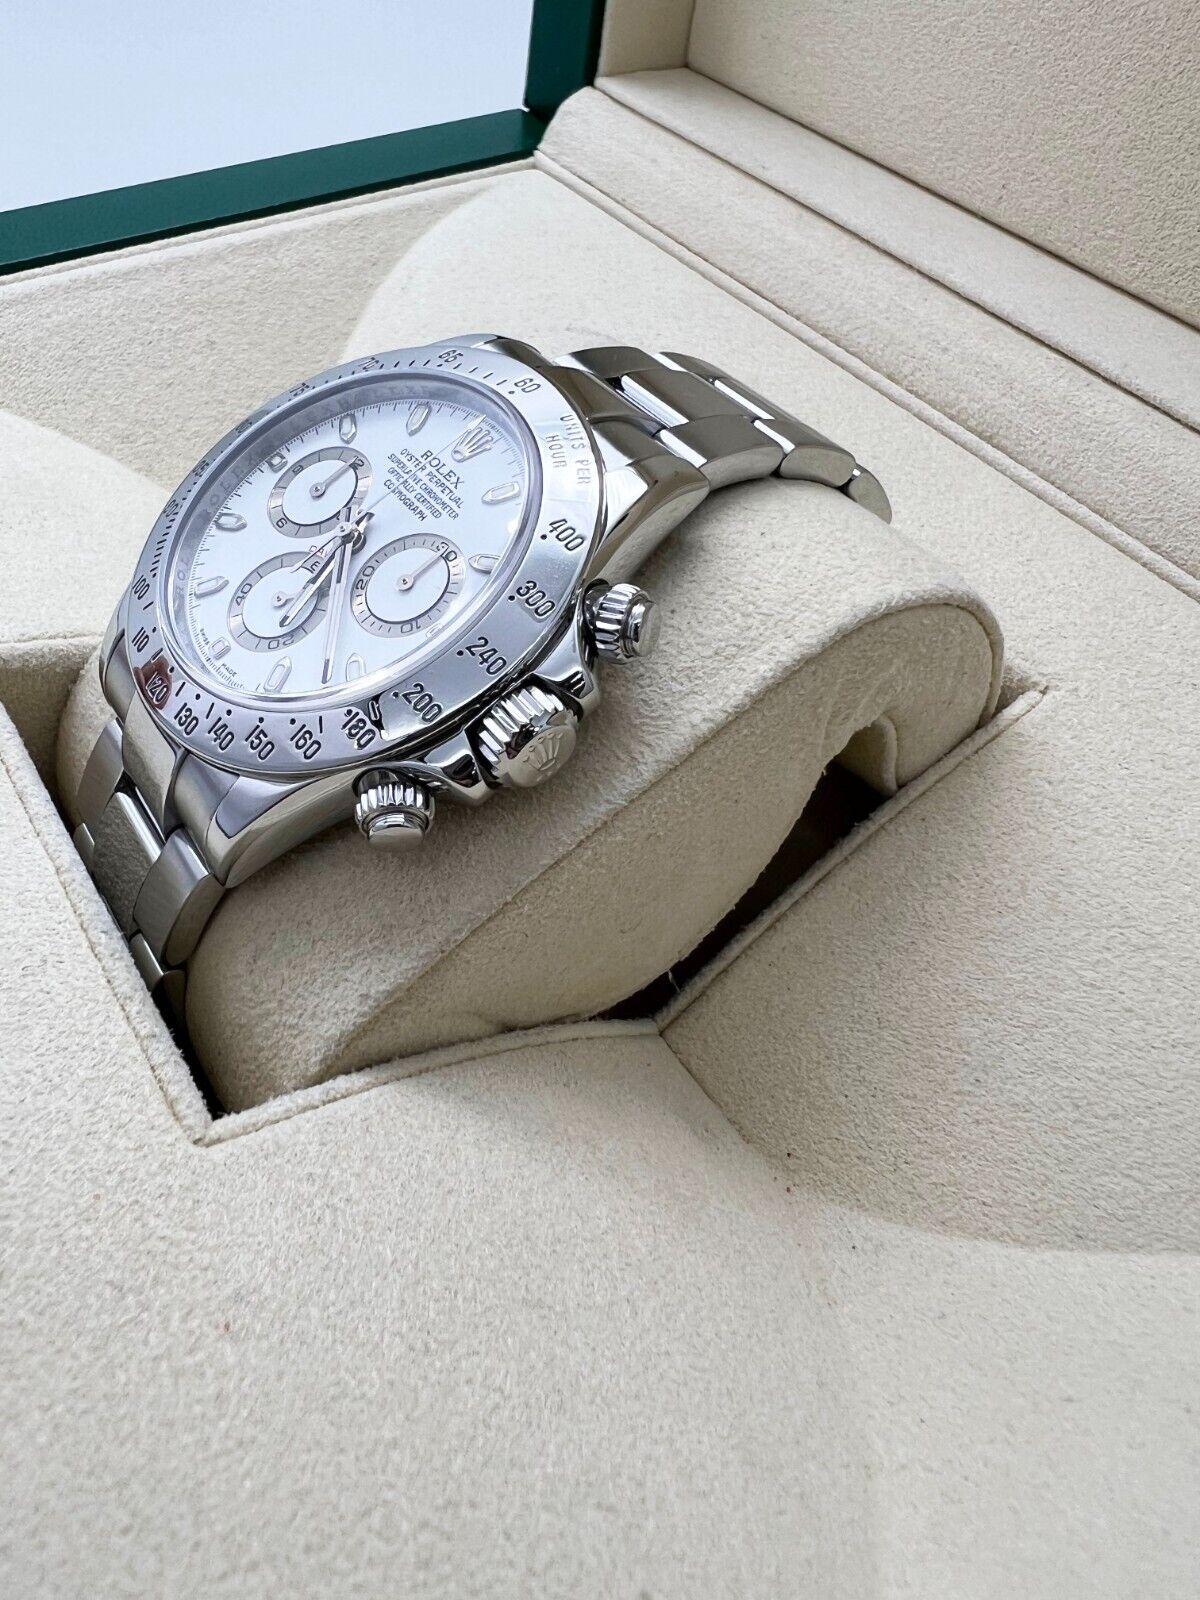 Rolex 116520 Daytona White Dial Stainless Steel Box Paper OPEN CARD 3